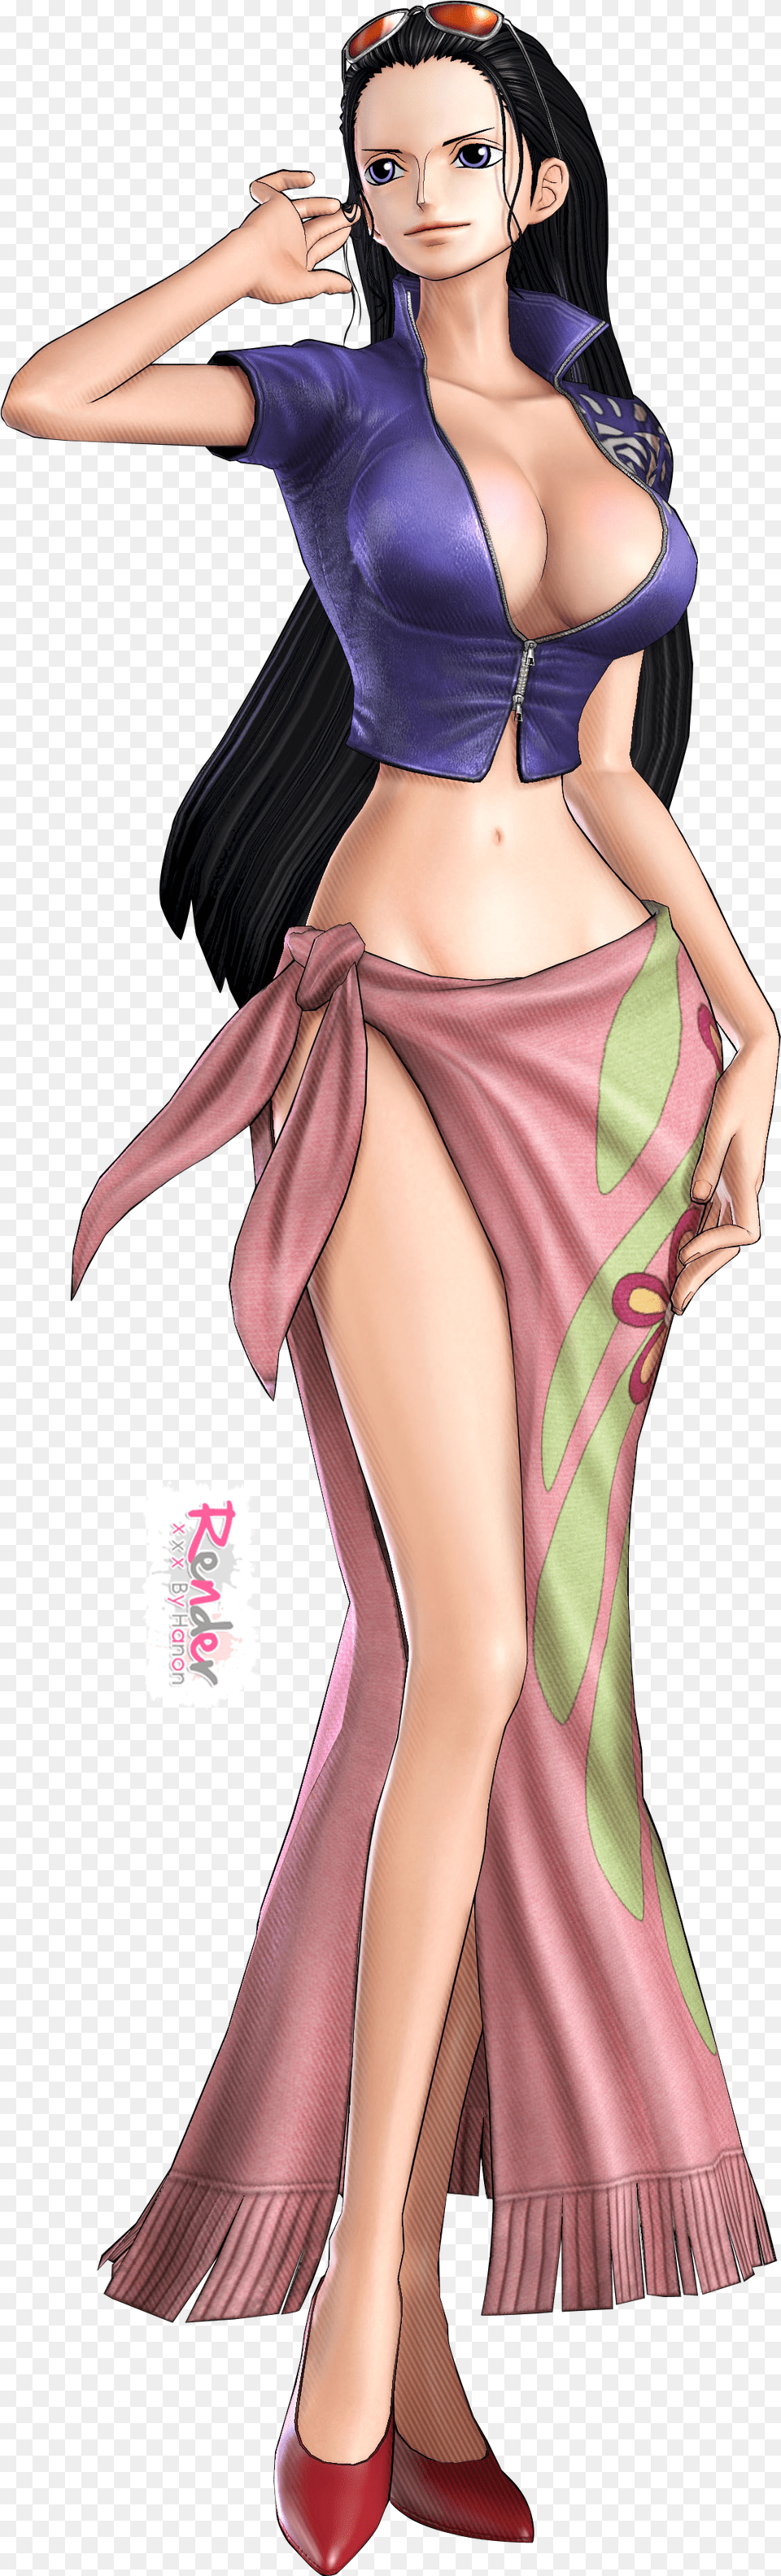 Pin By Razvan Afloarei On Render Anime One Piece Pirate Warriors Robin, Adult, Publication, Person, Woman Png